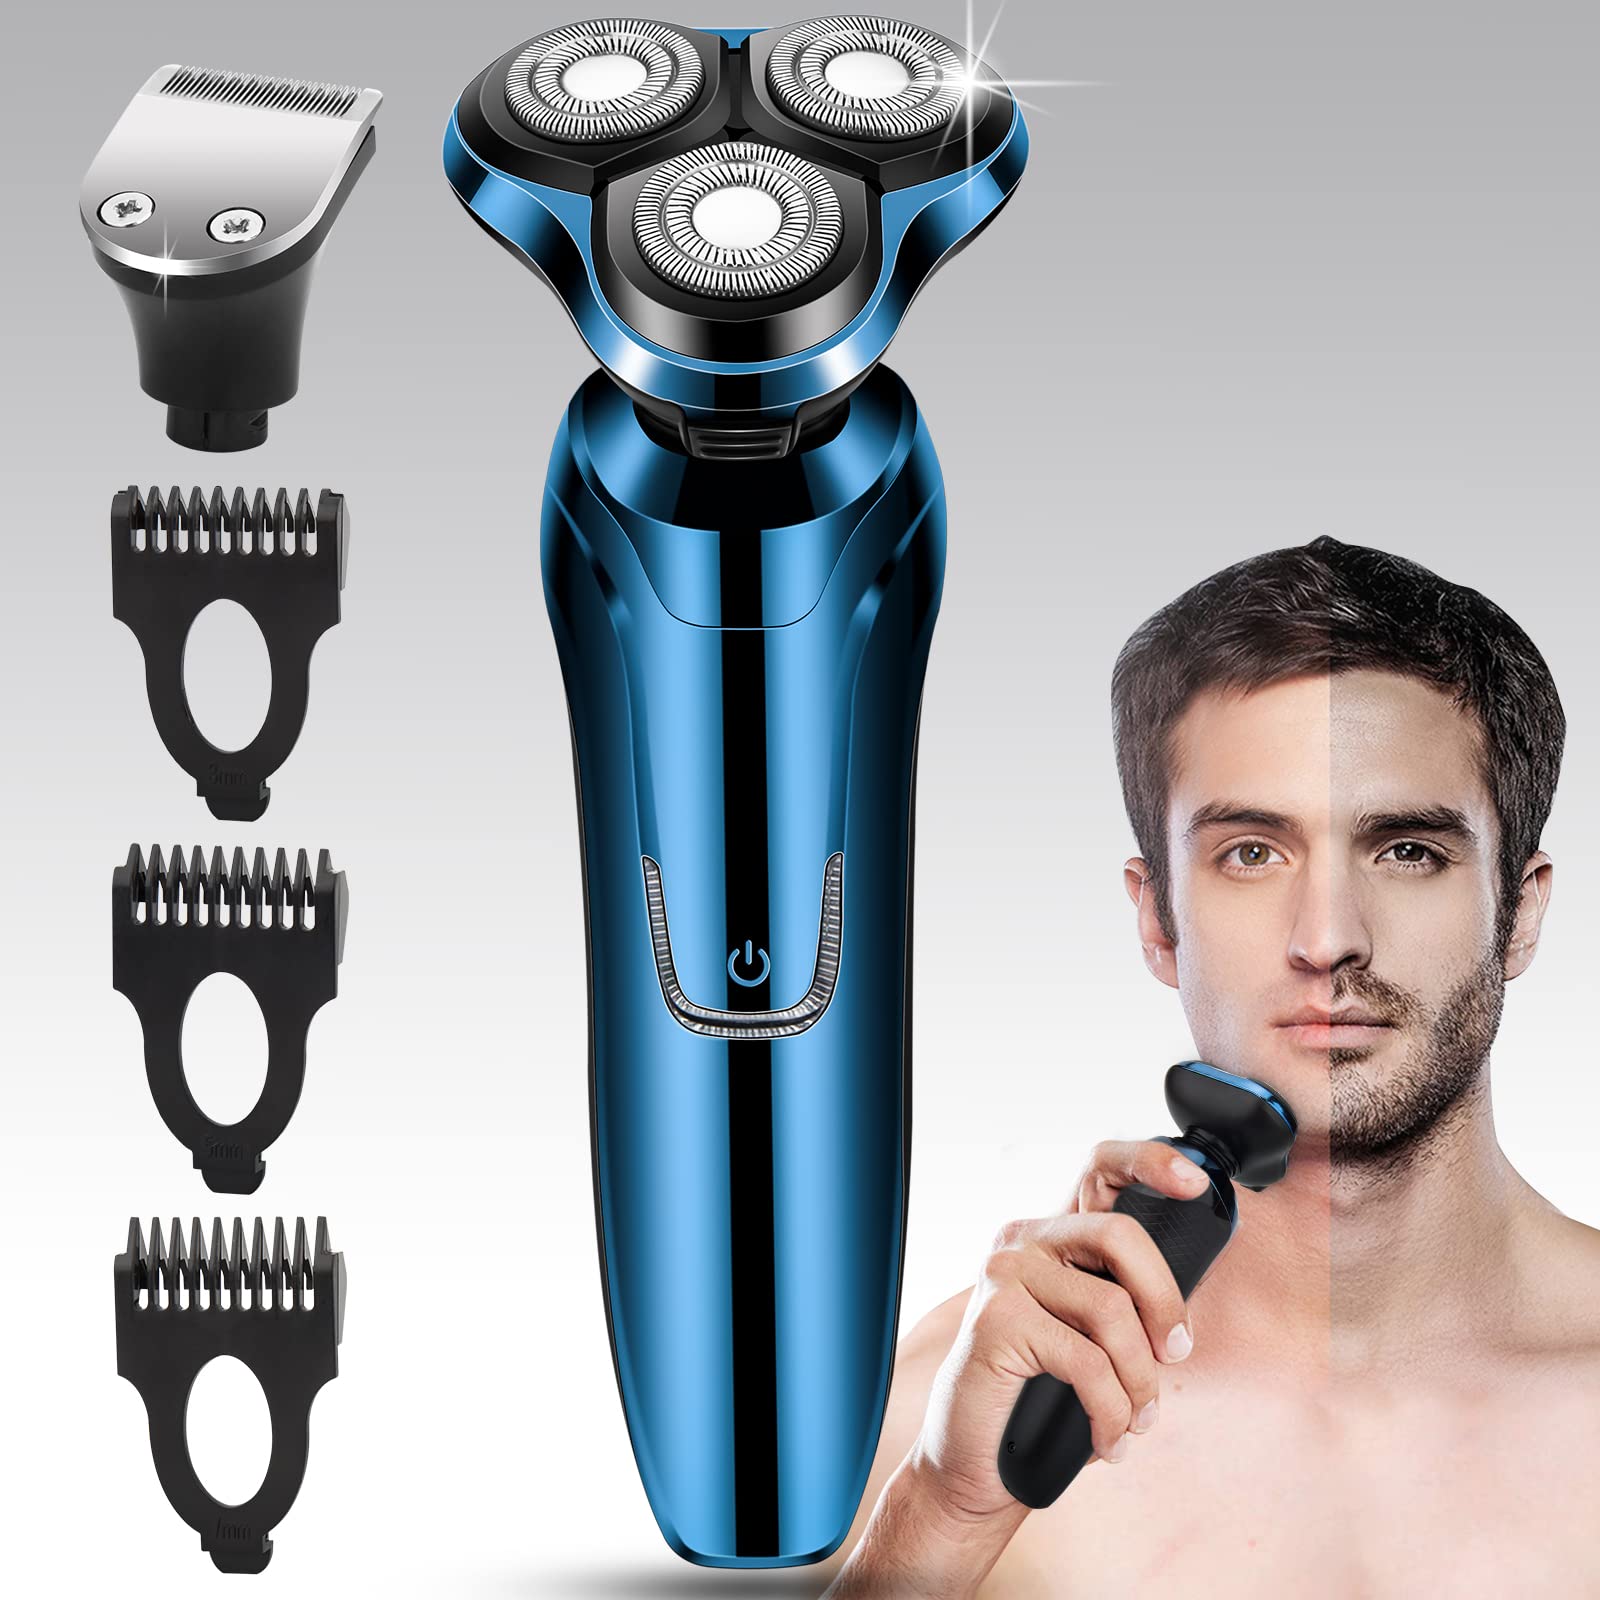 Vifycim Handsomeface Electric Razor for Men, Mens Electric Shavers, Dry Wet Waterproof Rotary Shaver Razors, Cordless Face Shaver USB Re